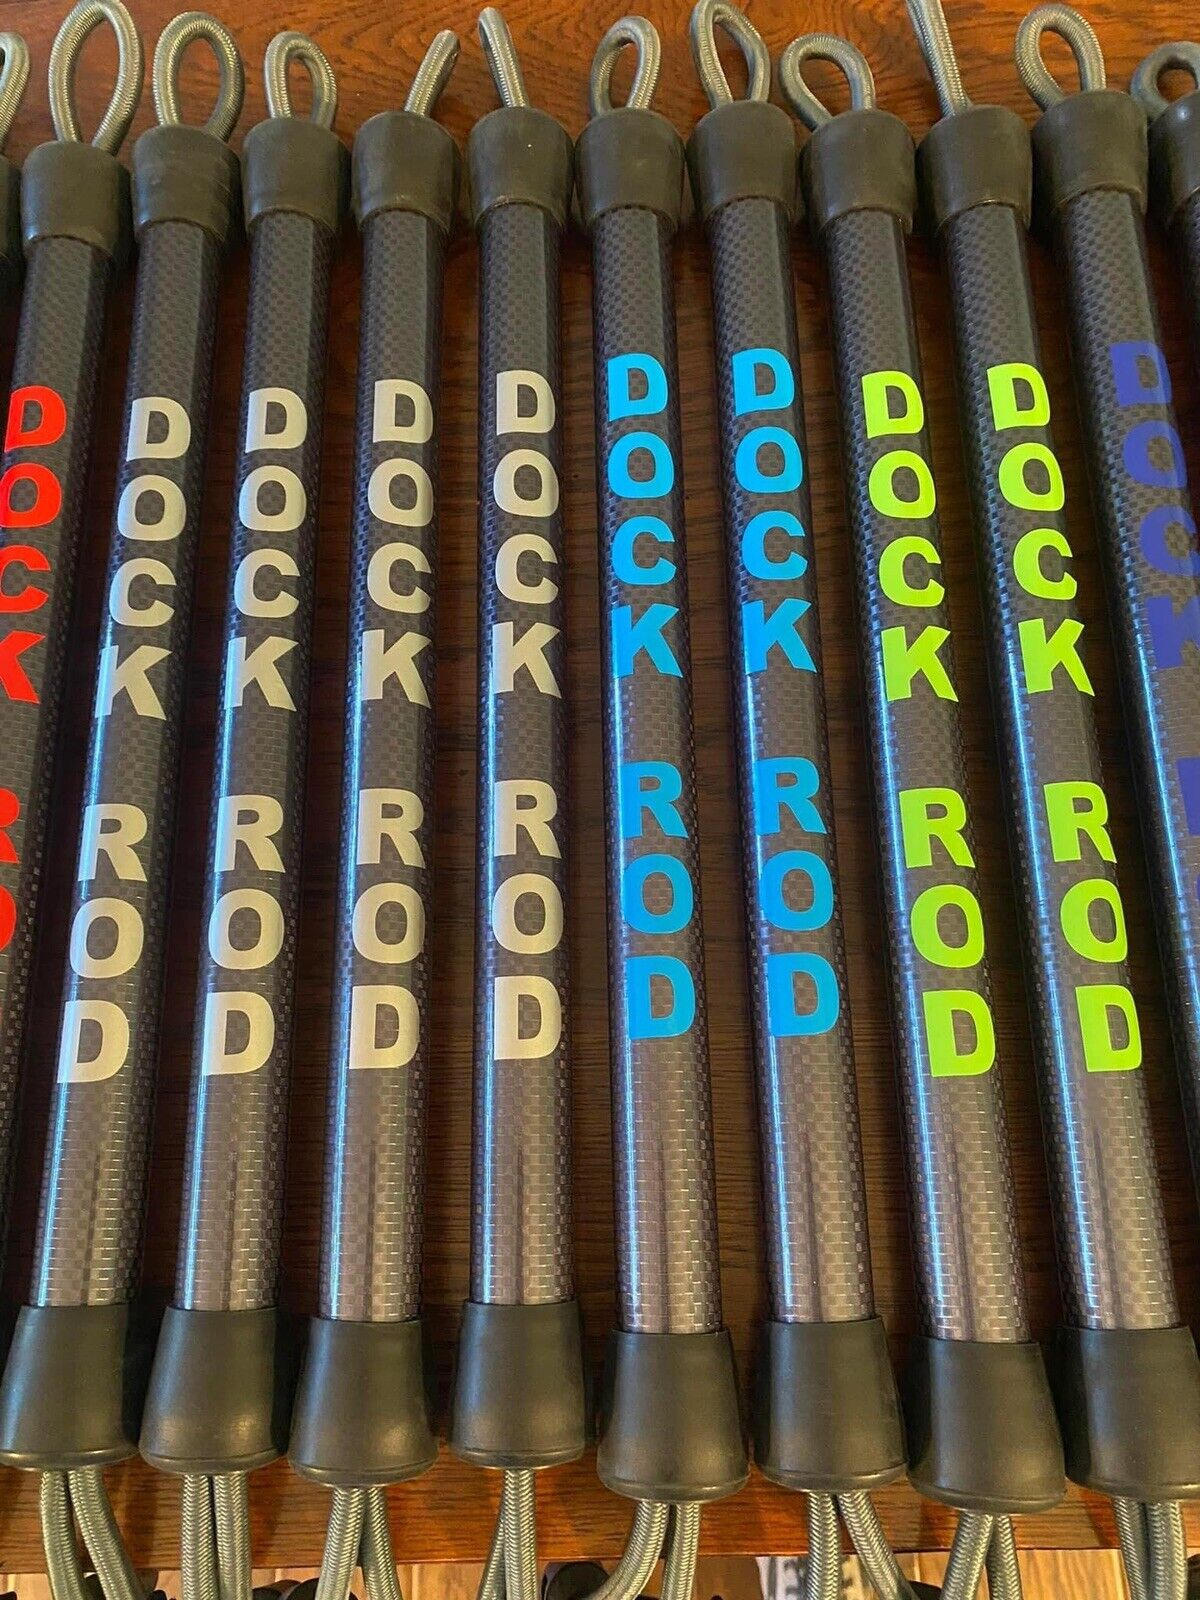 NEW - Set of 2 Dock Rods Fishing Boat Protection Docking (Various Colors)